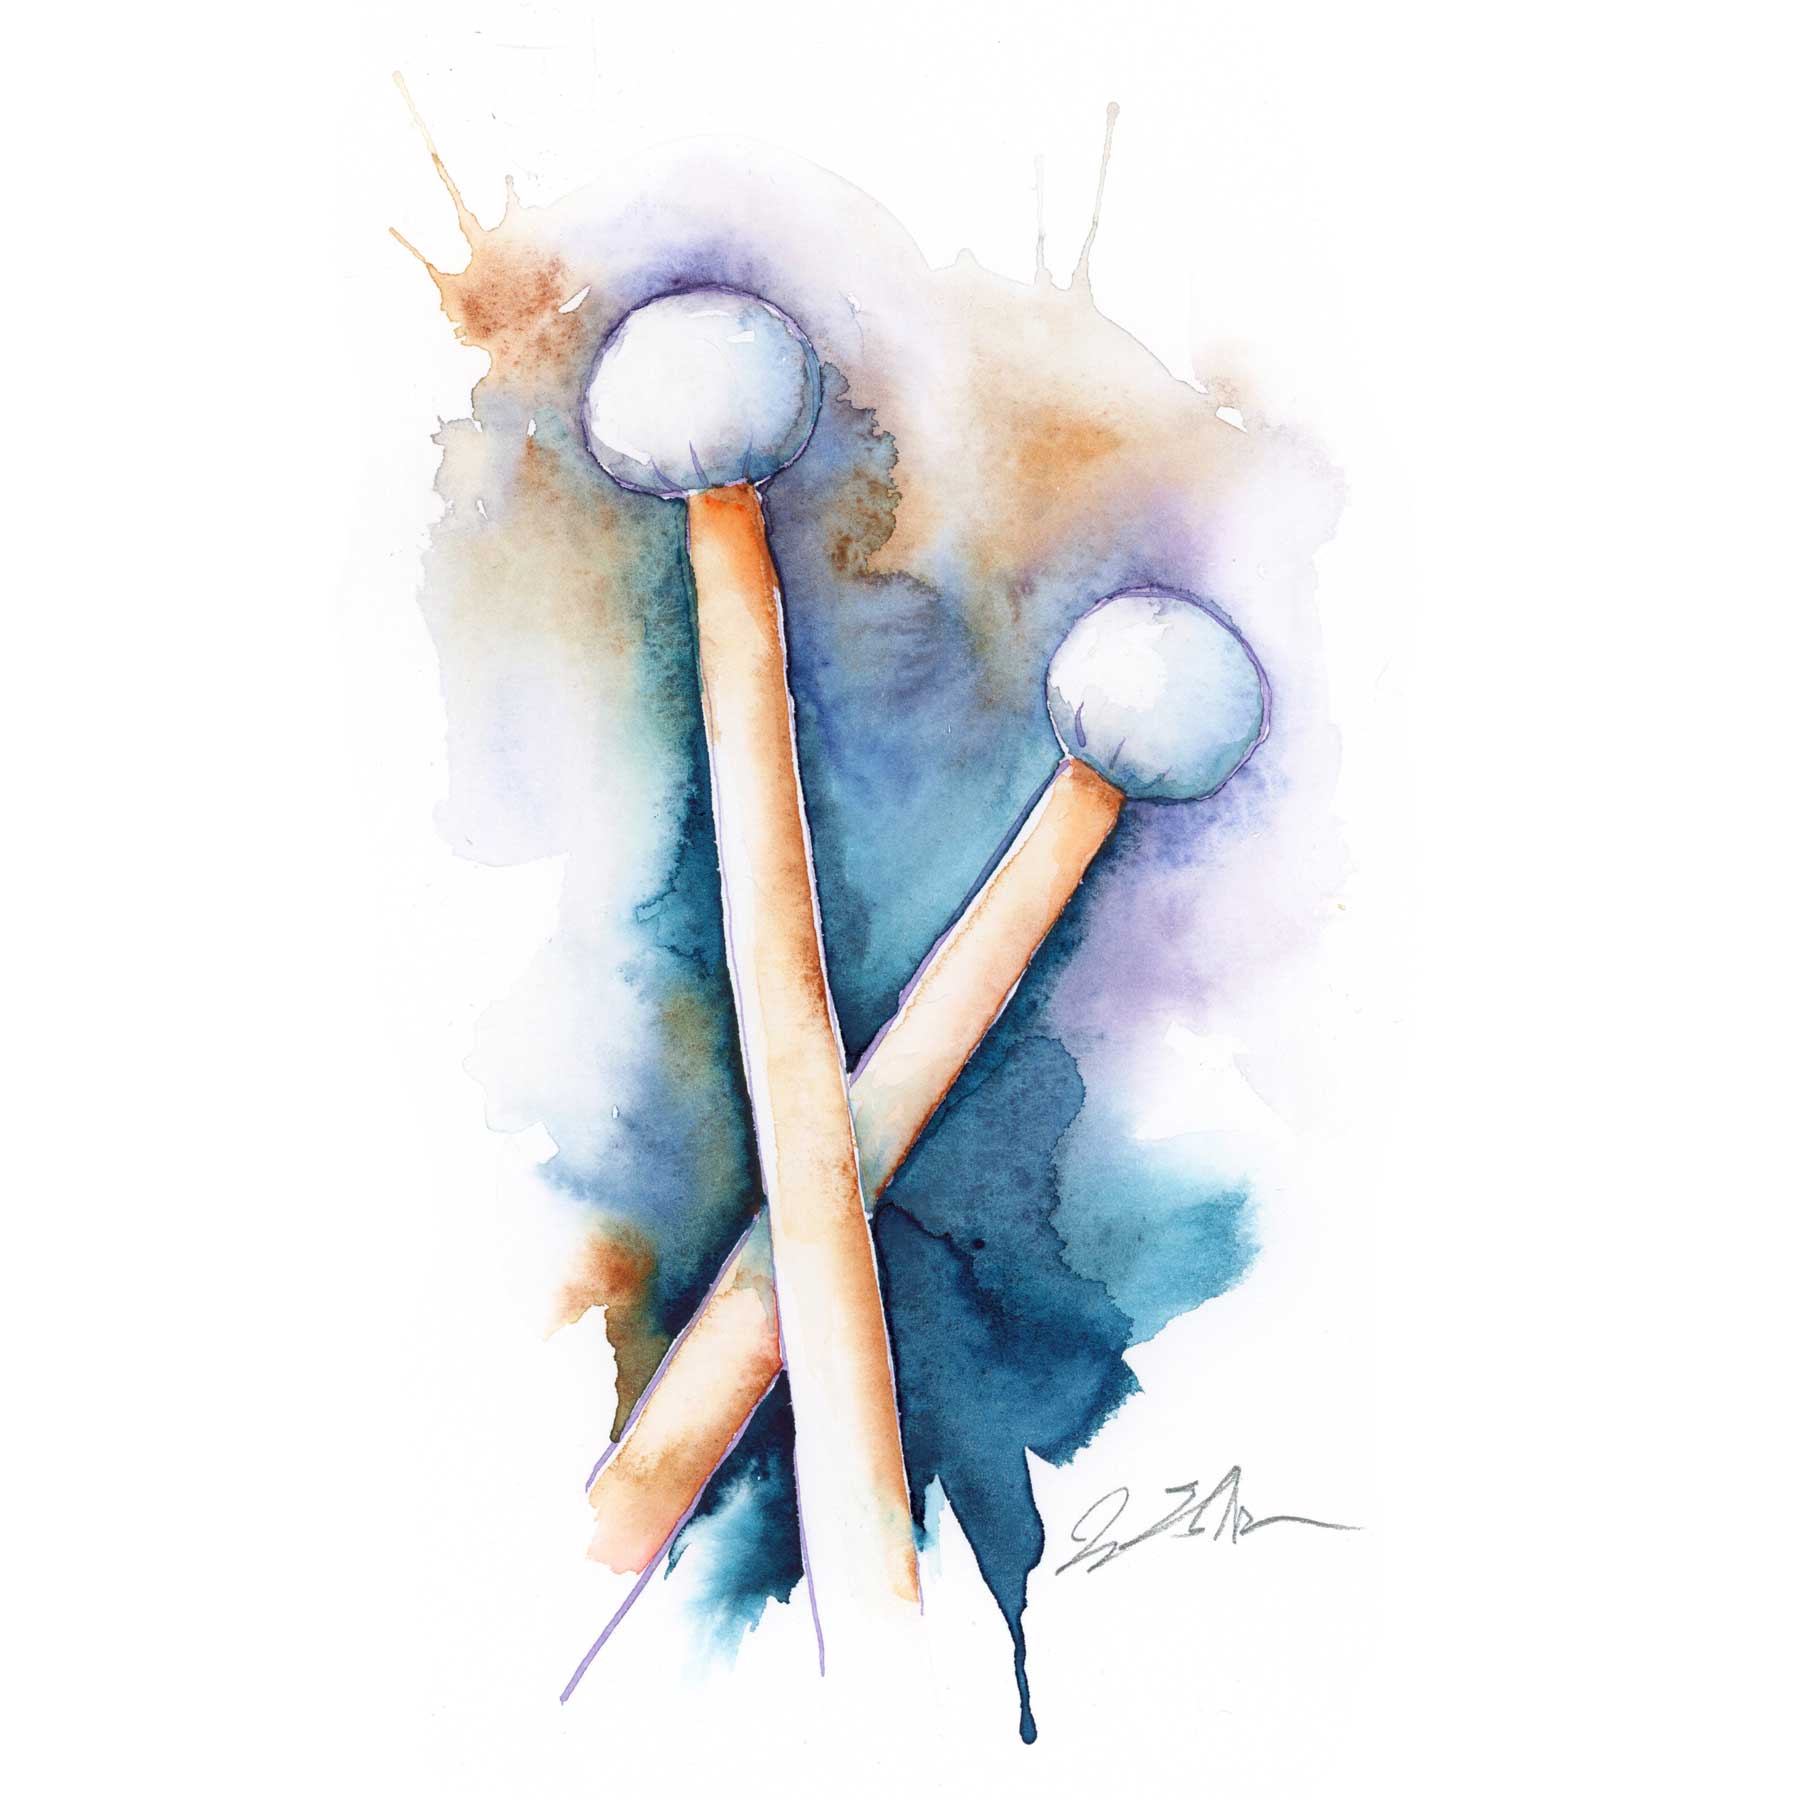 a set of mallets painted in watercolor